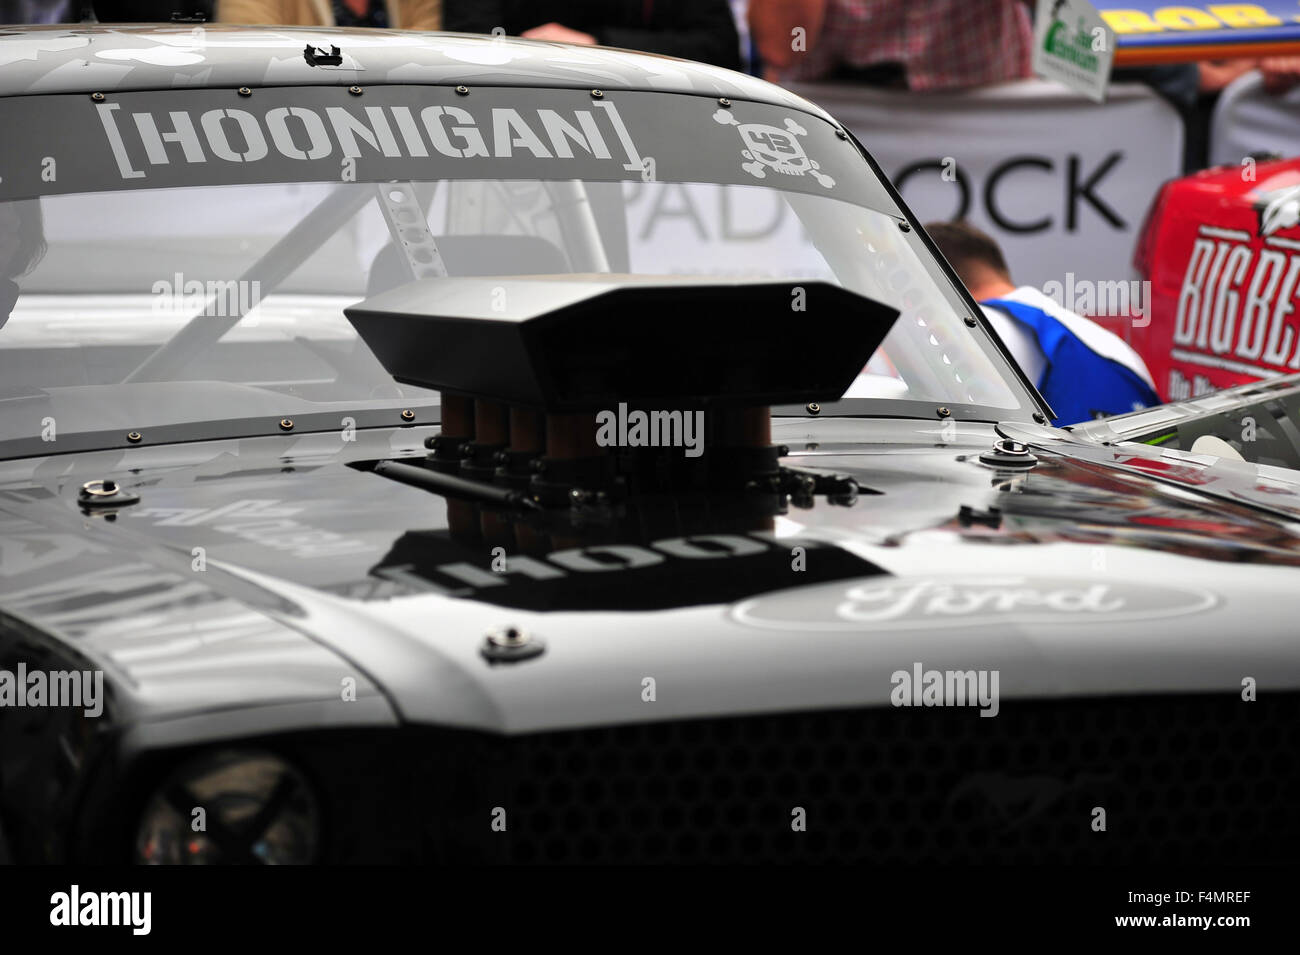 Ken Block's Ford Mustang Hoonicorn at the Goodwood Festival of Speed in the UK. Stock Photo